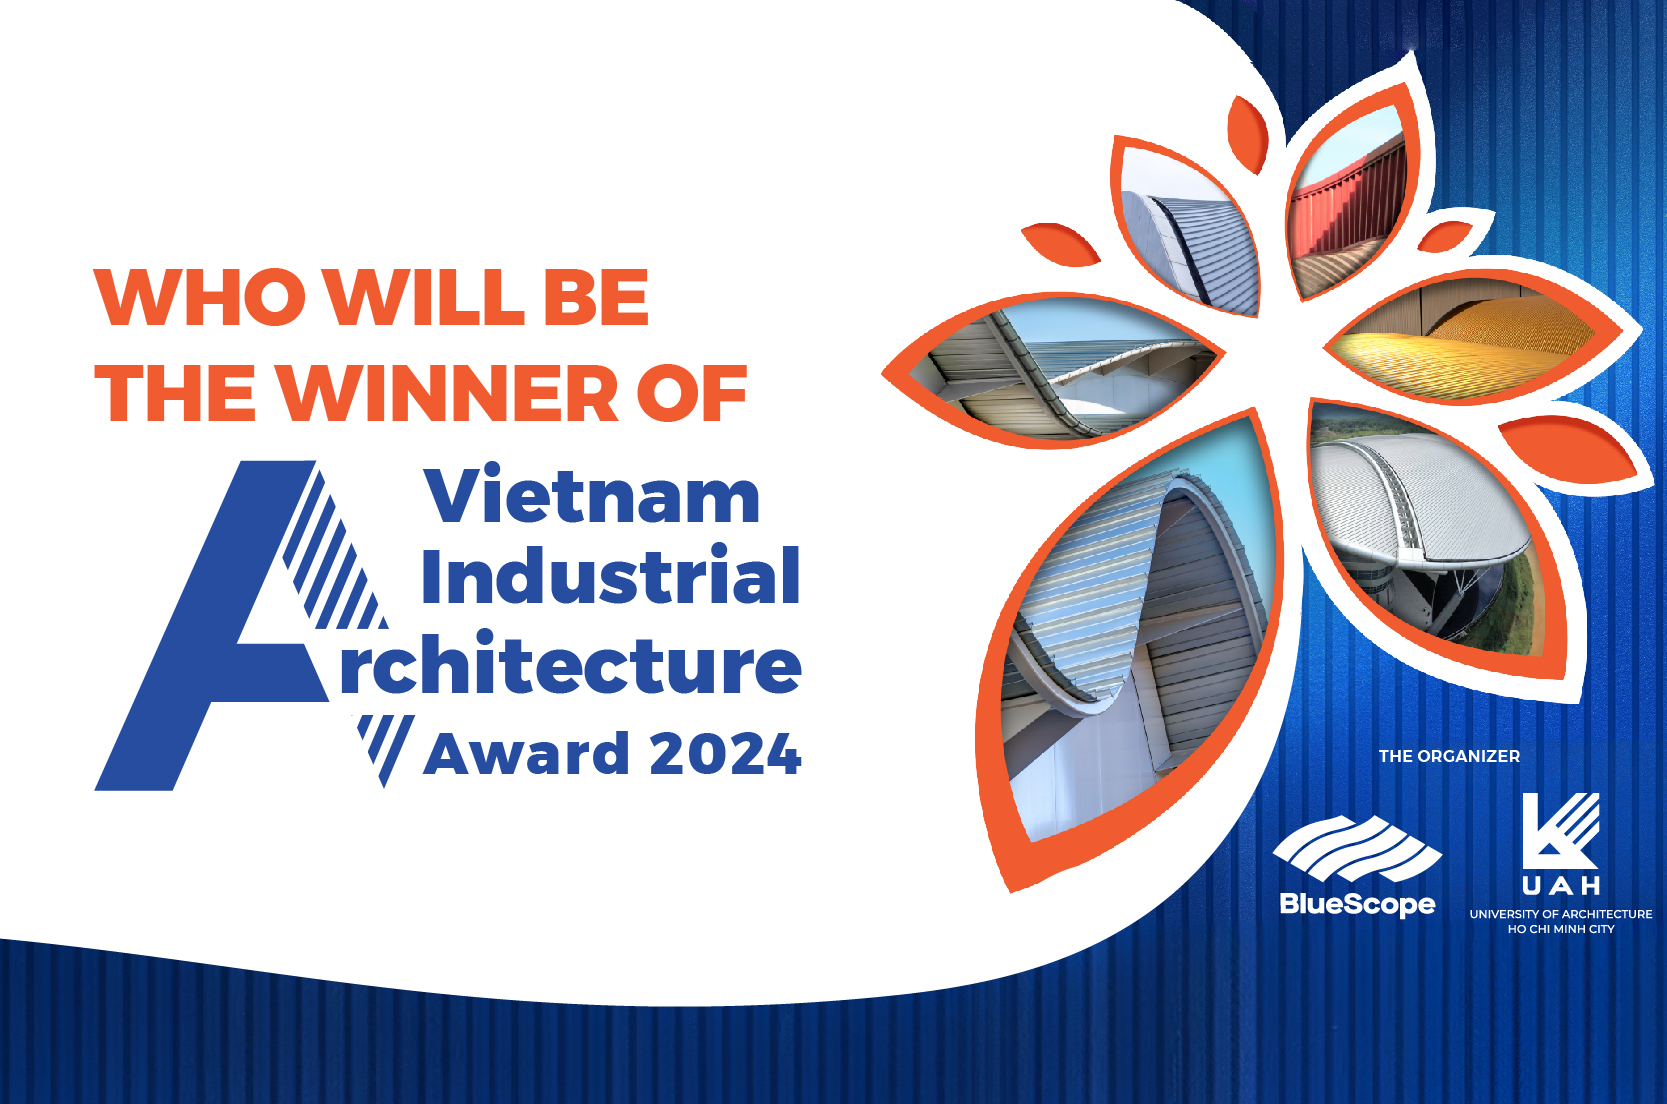 WHO WILL BE THE WINNER OF THE VIETNAM INDUSTRIAL ARCHITECTURE AWARD 2024?